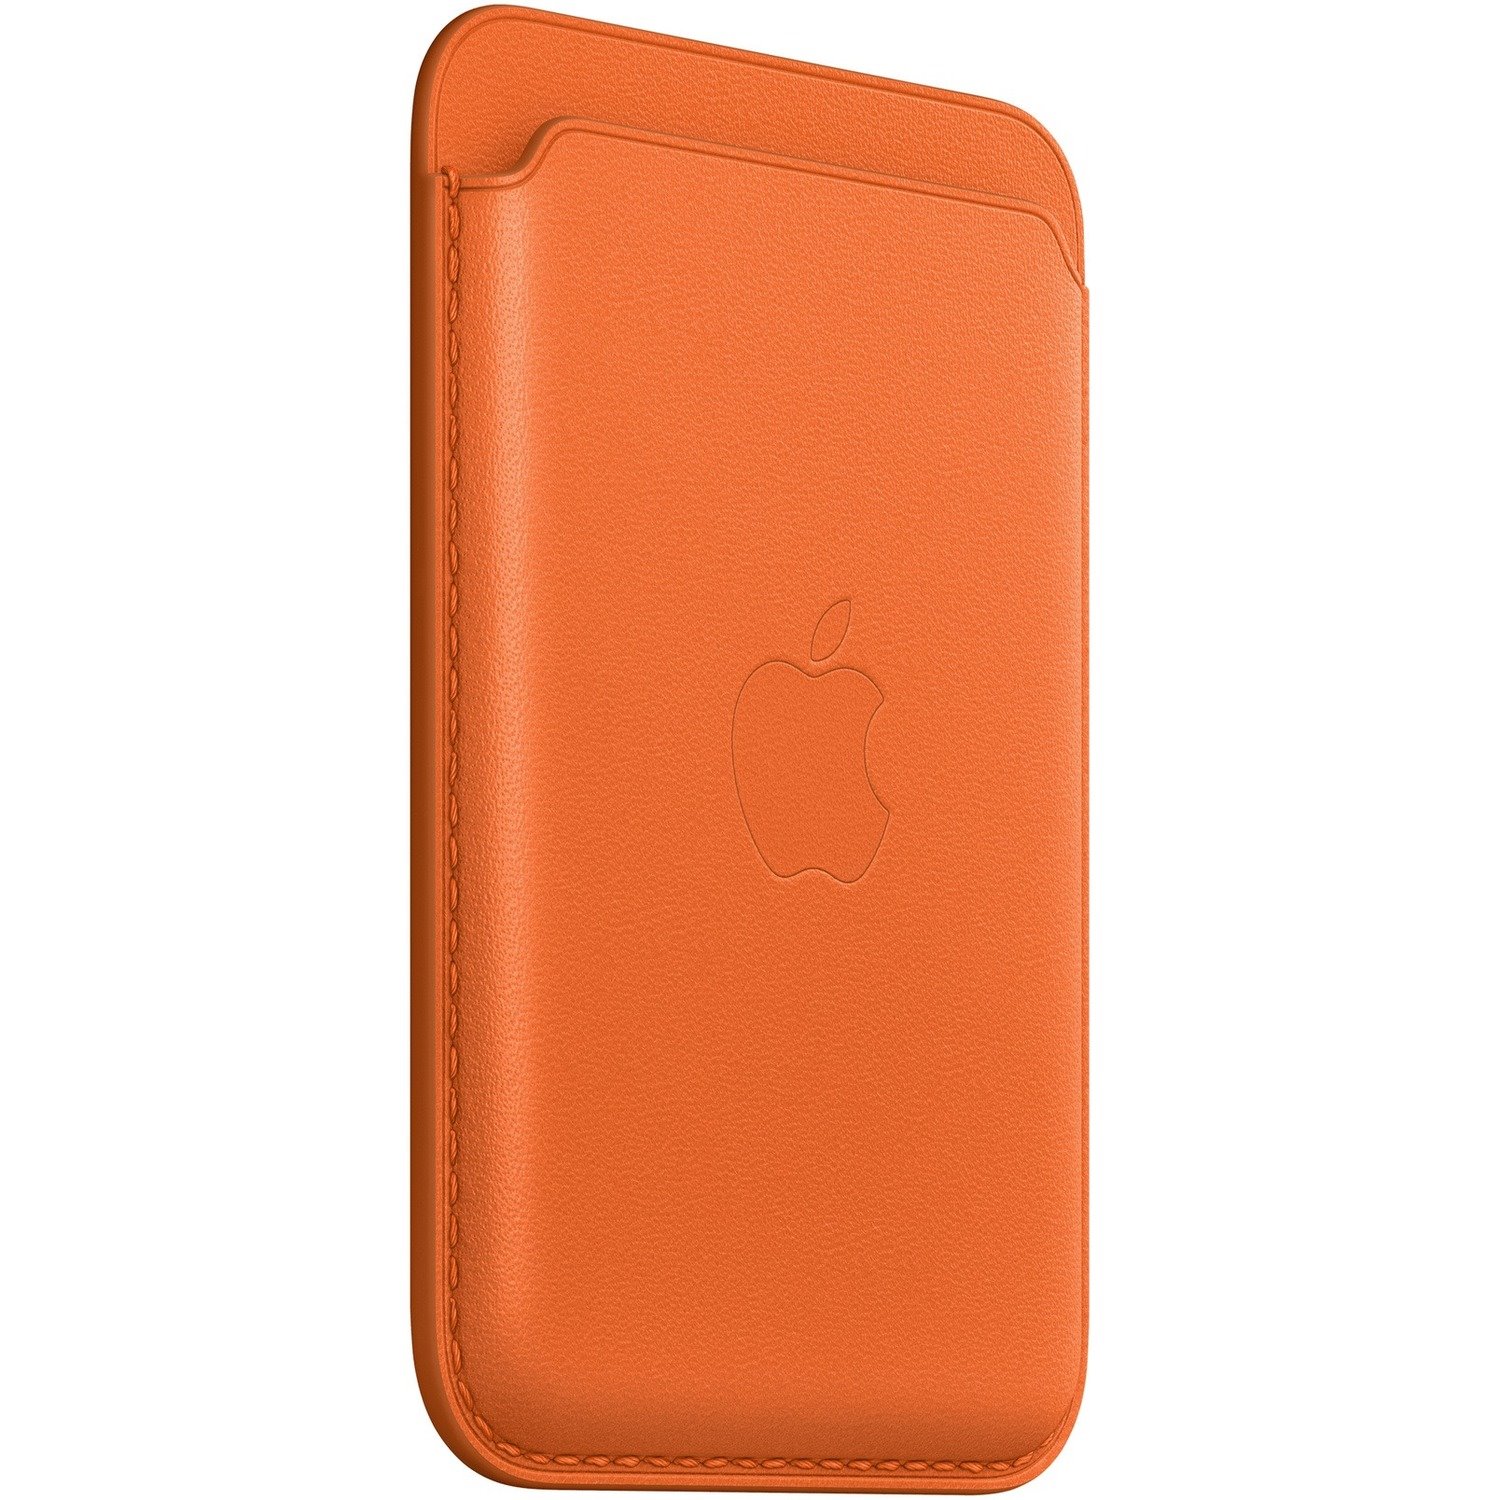 Apple Carrying Case (Wallet) Apple iPhone 14 Pro, iPhone 14 Pro Max, iPhone 14 Plus, iPhone 14, iPhone 13 Pro Max, iPhone 13 Pro, iPhone 13 mini, iPhone 13, iPhone 12 Pro, iPhone 12 Pro Max, iPhone 12 mini, ... Smartphone - Orange